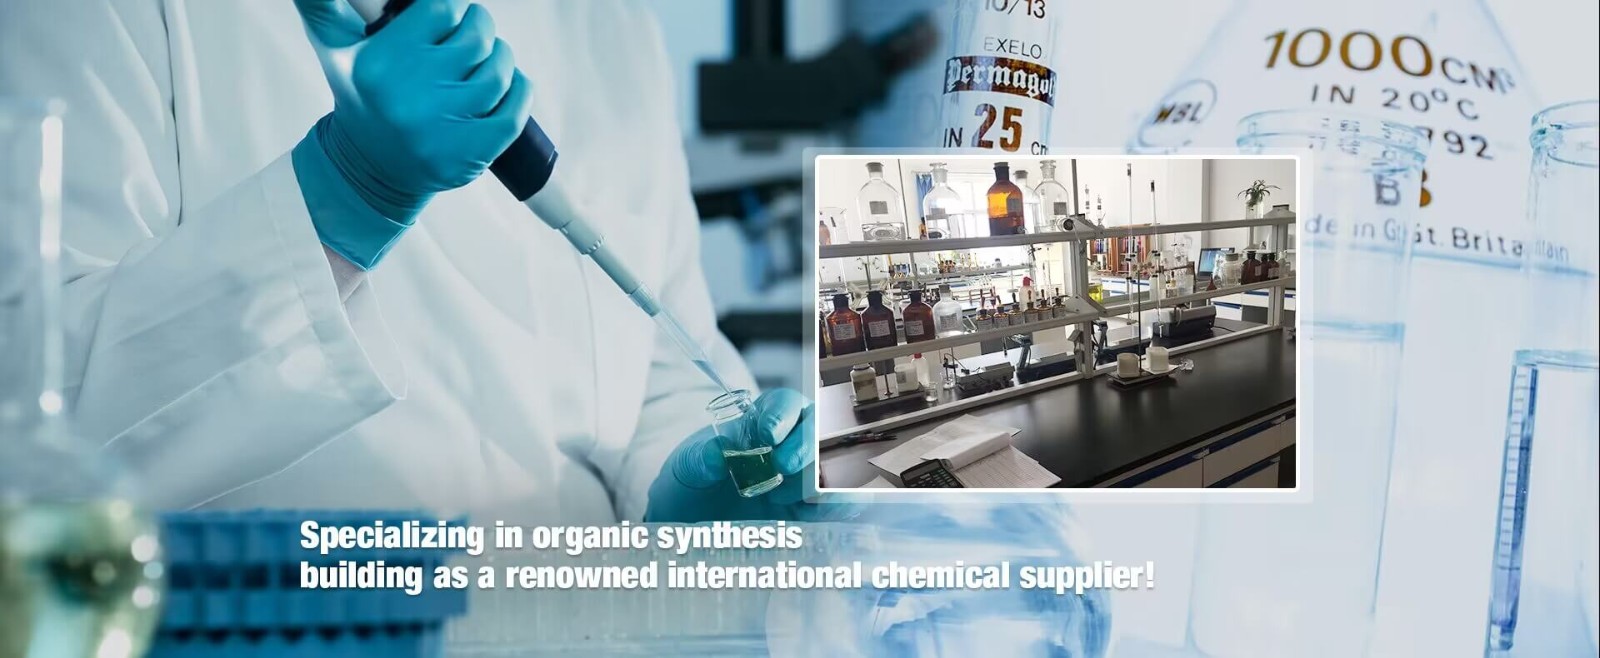 Specializing in organic synthesis building as a renowned international chemical supplier!